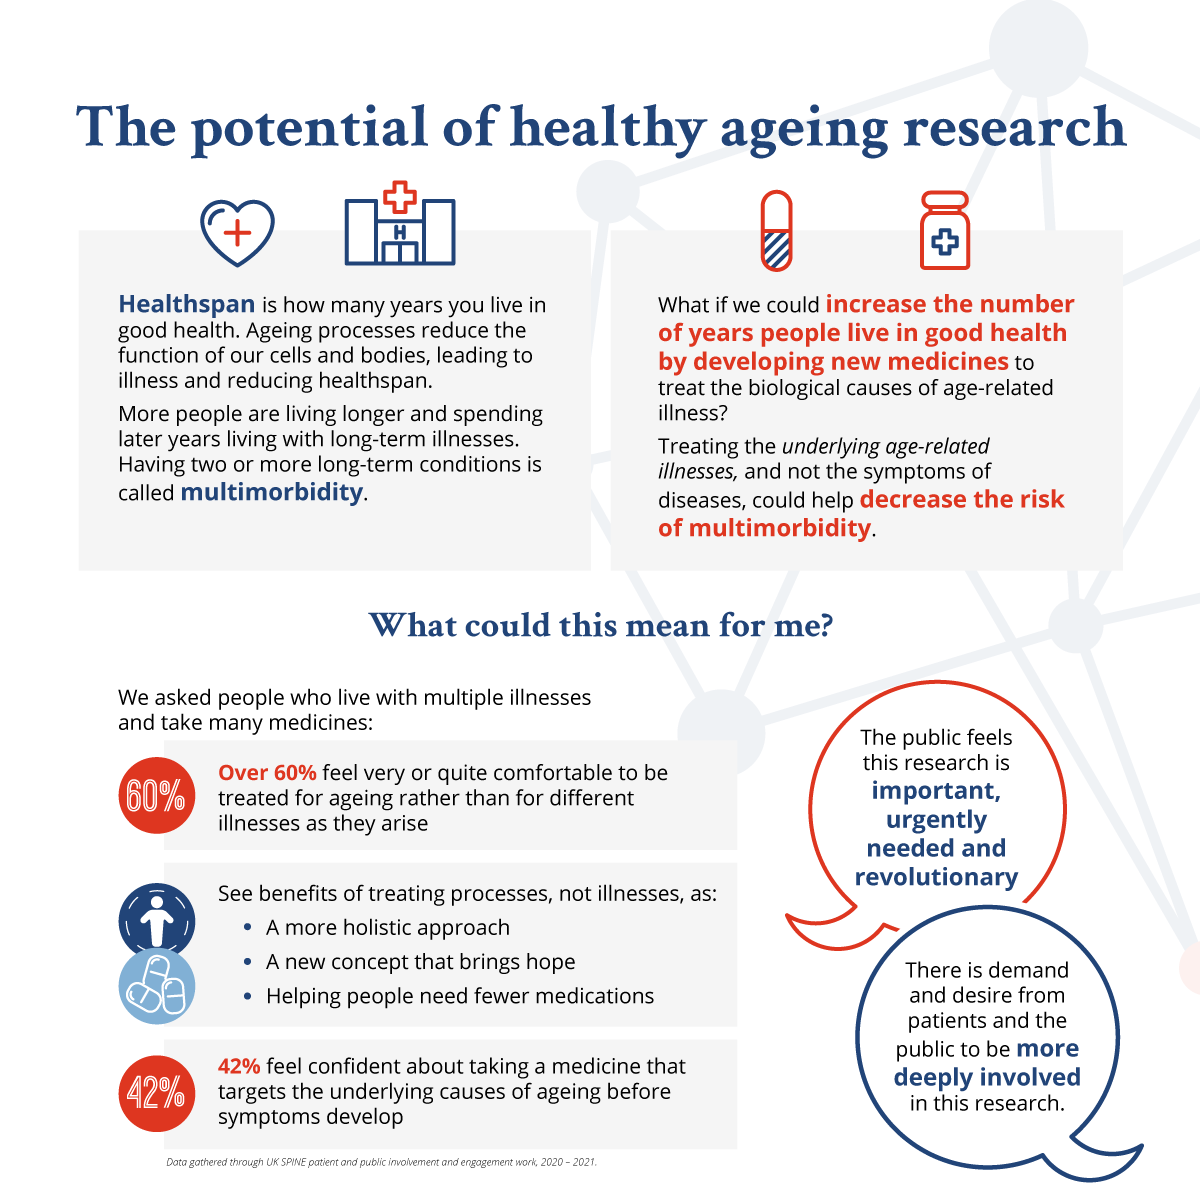 The potential of healthy ageing